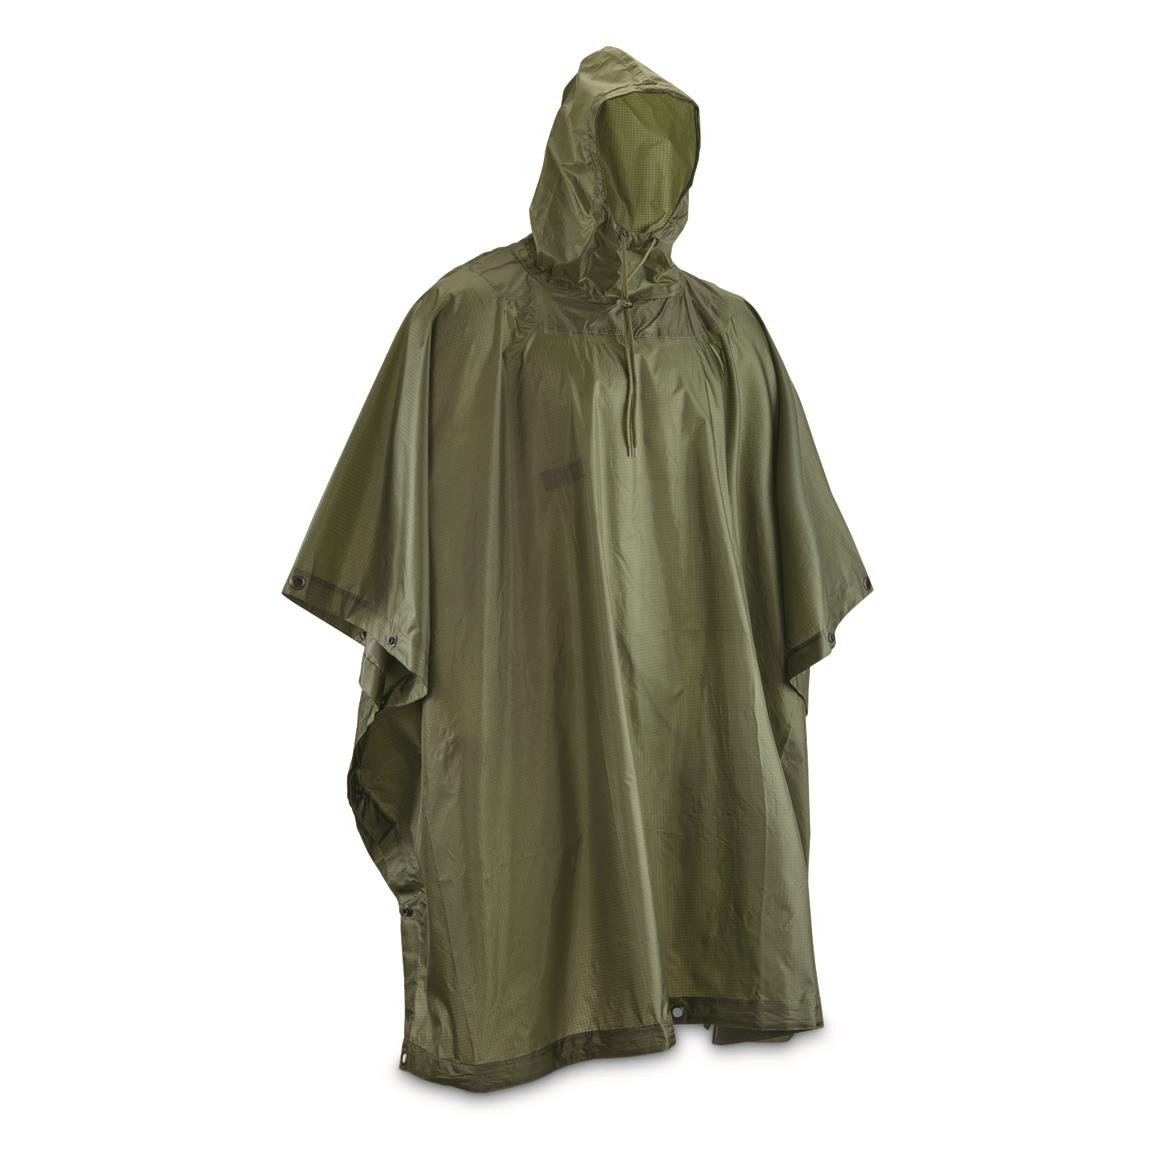 Brooklyn Armed Forces Enhanced Military Poncho with Stuff Sack, Olive Drab